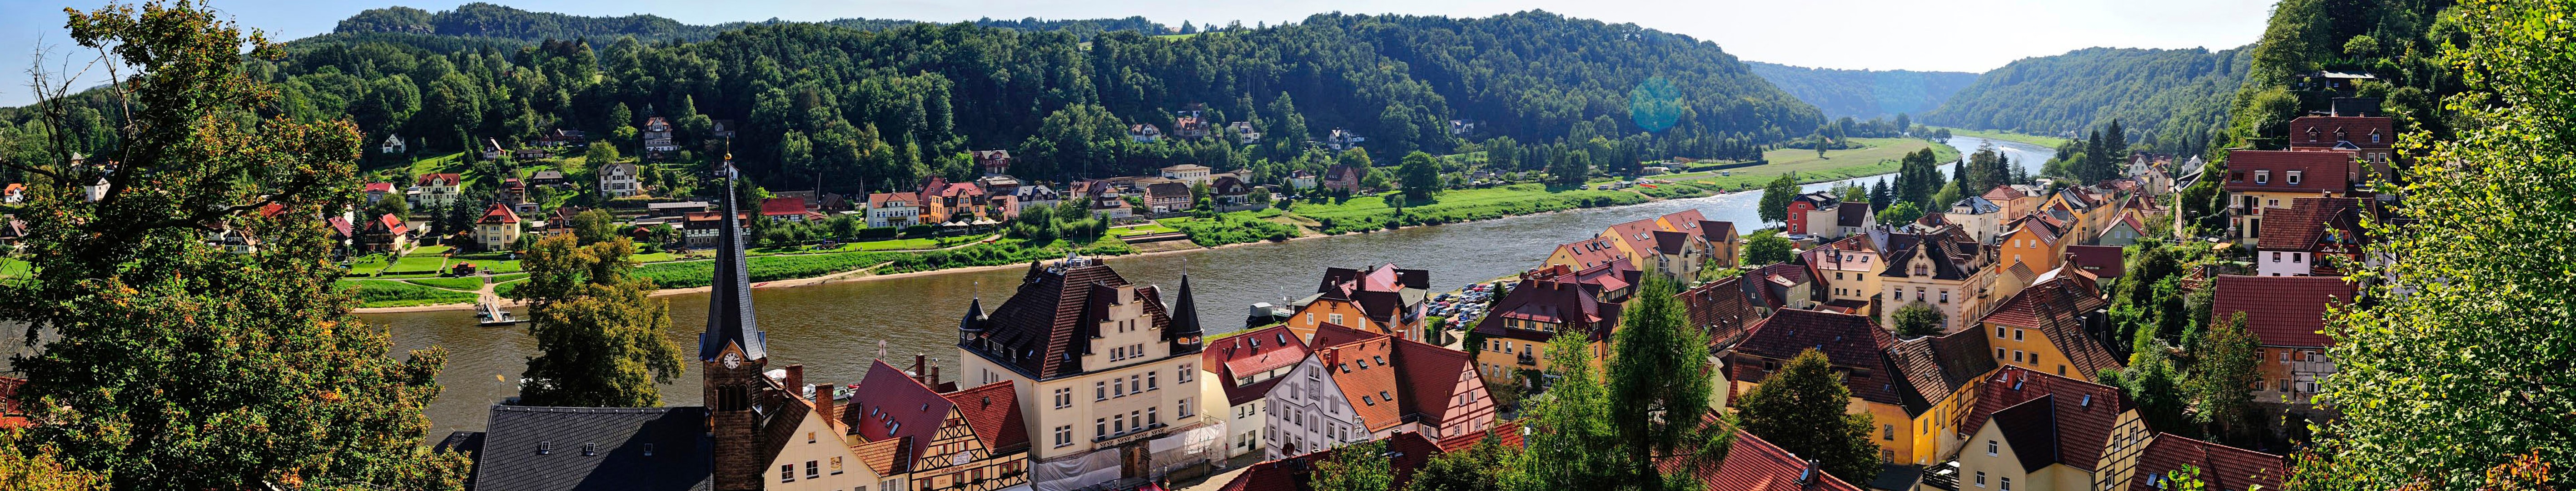 europe, photography, panorama, germany, hill, mountain, river, town, tree